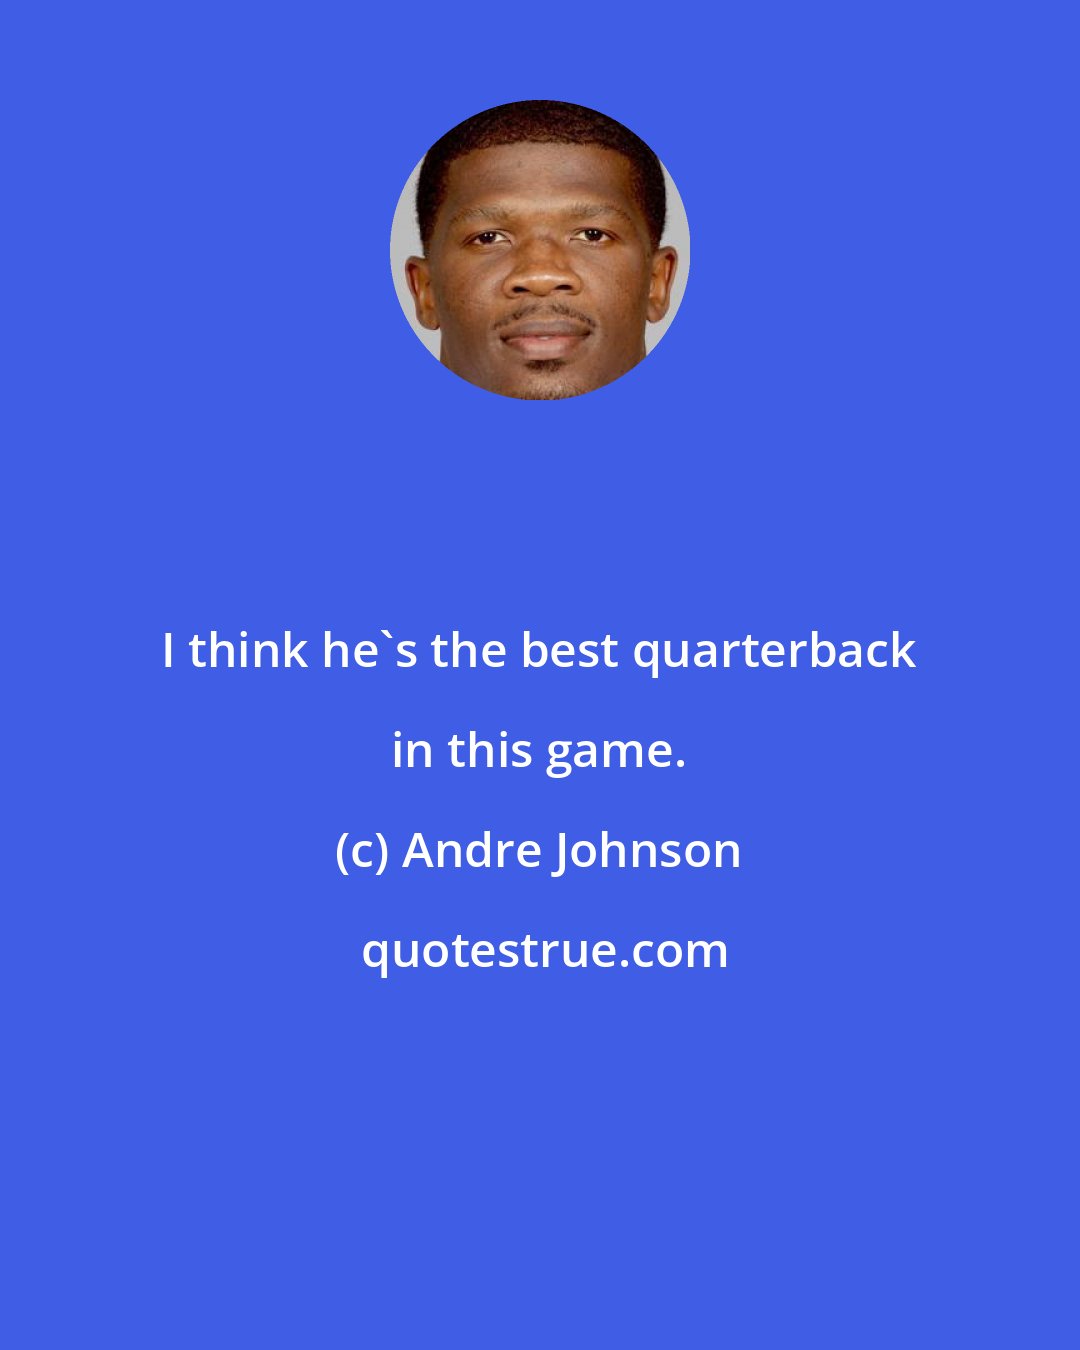 Andre Johnson: I think he's the best quarterback in this game.